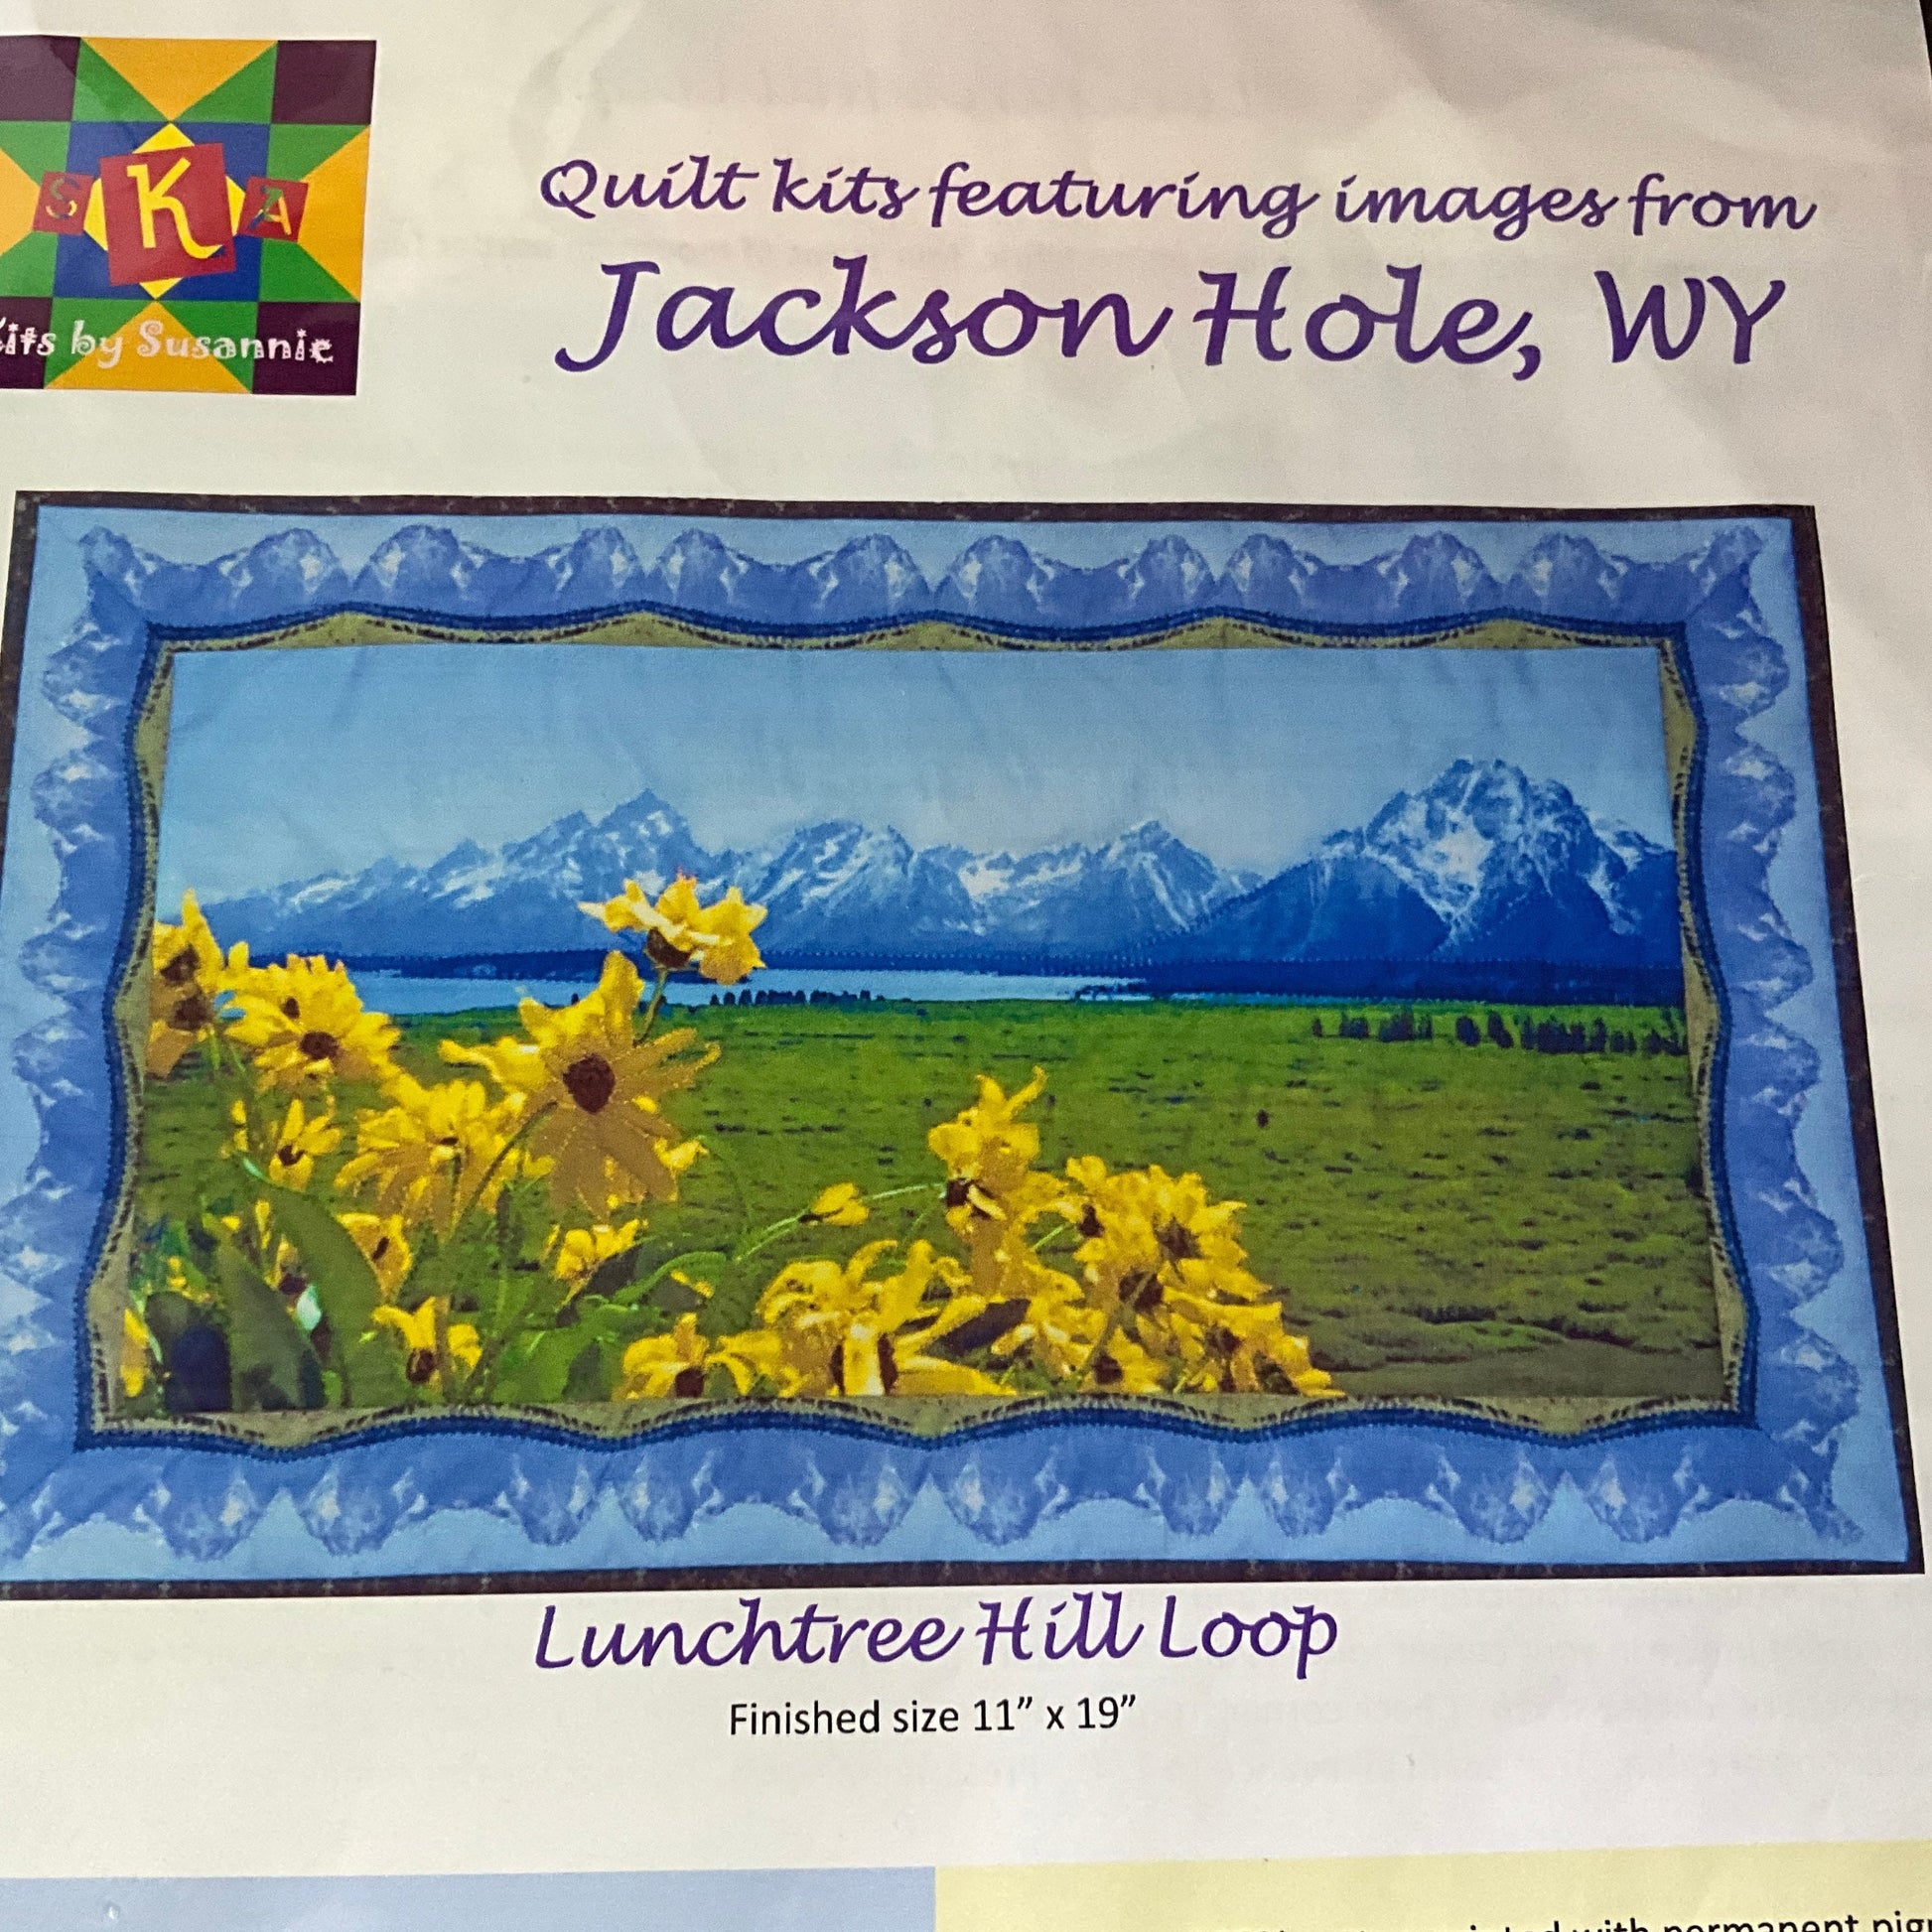 Susannie Jackson Hole, WY Lunchtree Hill LoopPrinted  Quilt Fabric